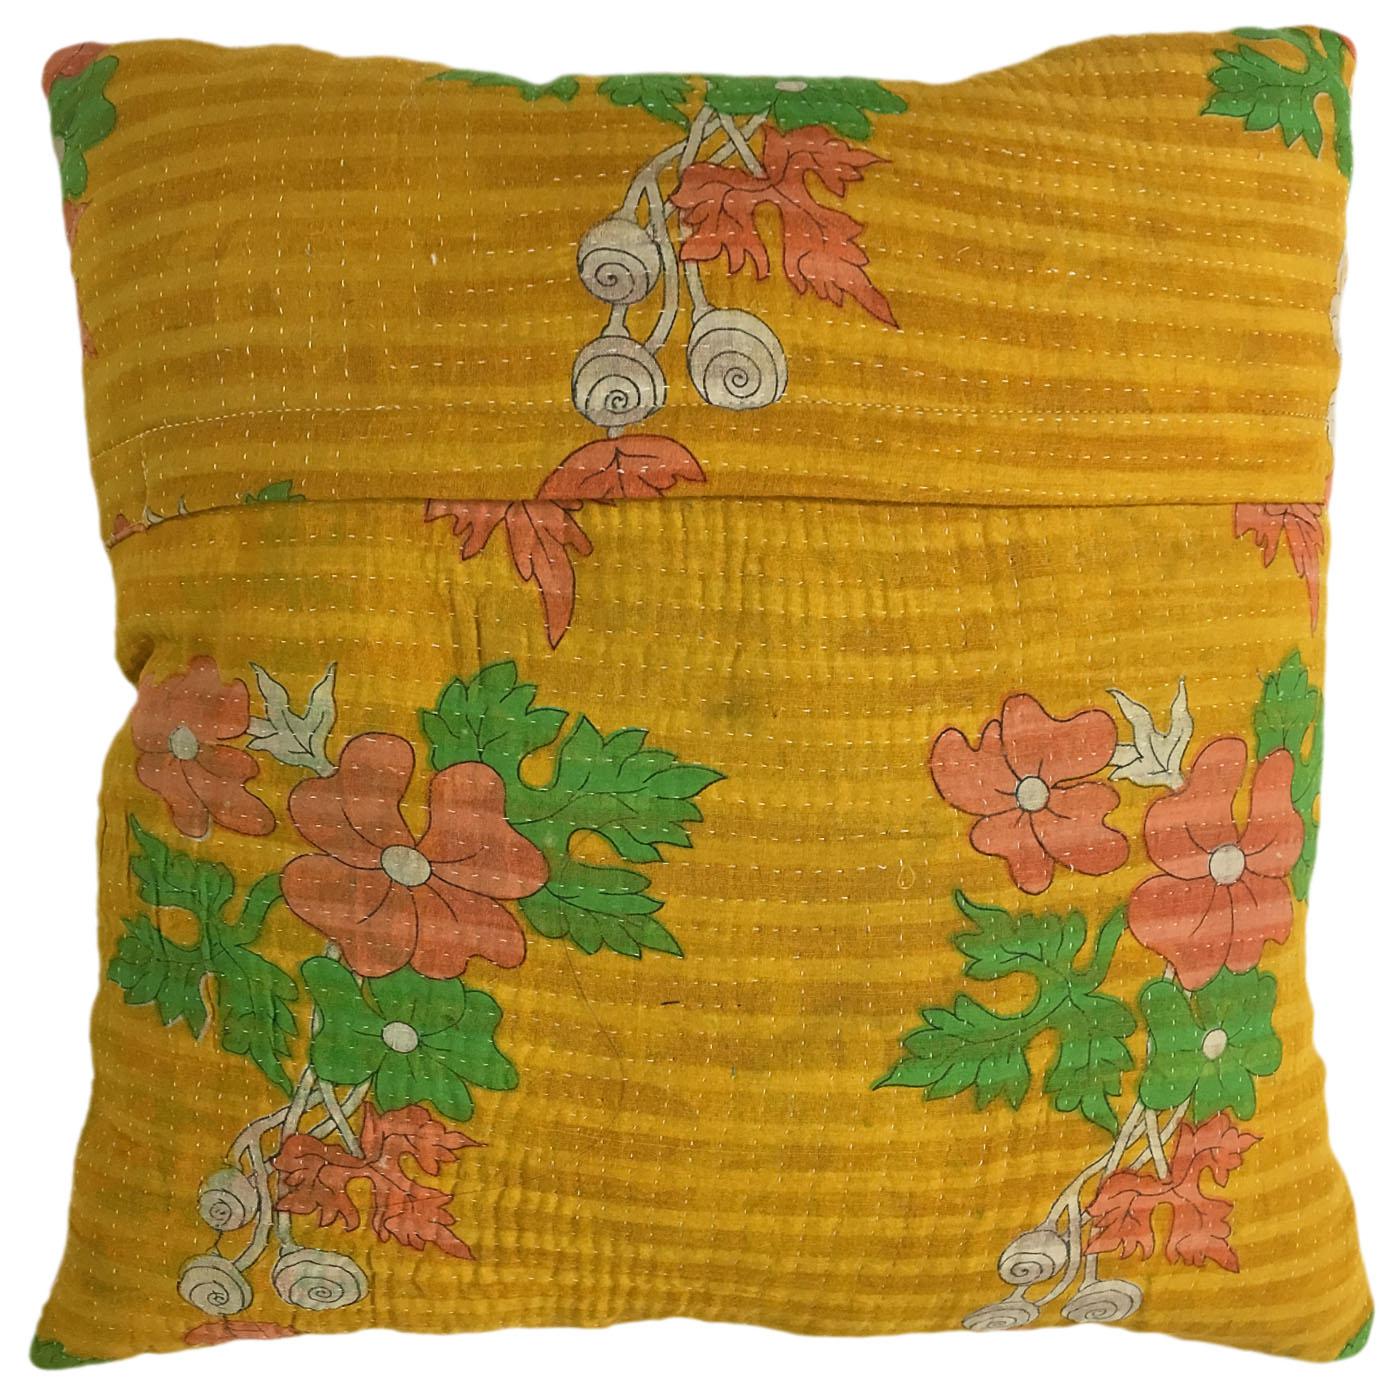 50X50cm Indian Christmas Gift Vintage Kantha Cushion Cover Indian Bohemian Patchwork Kantha Cushion Cover Handmade Antique Kantha Pillow